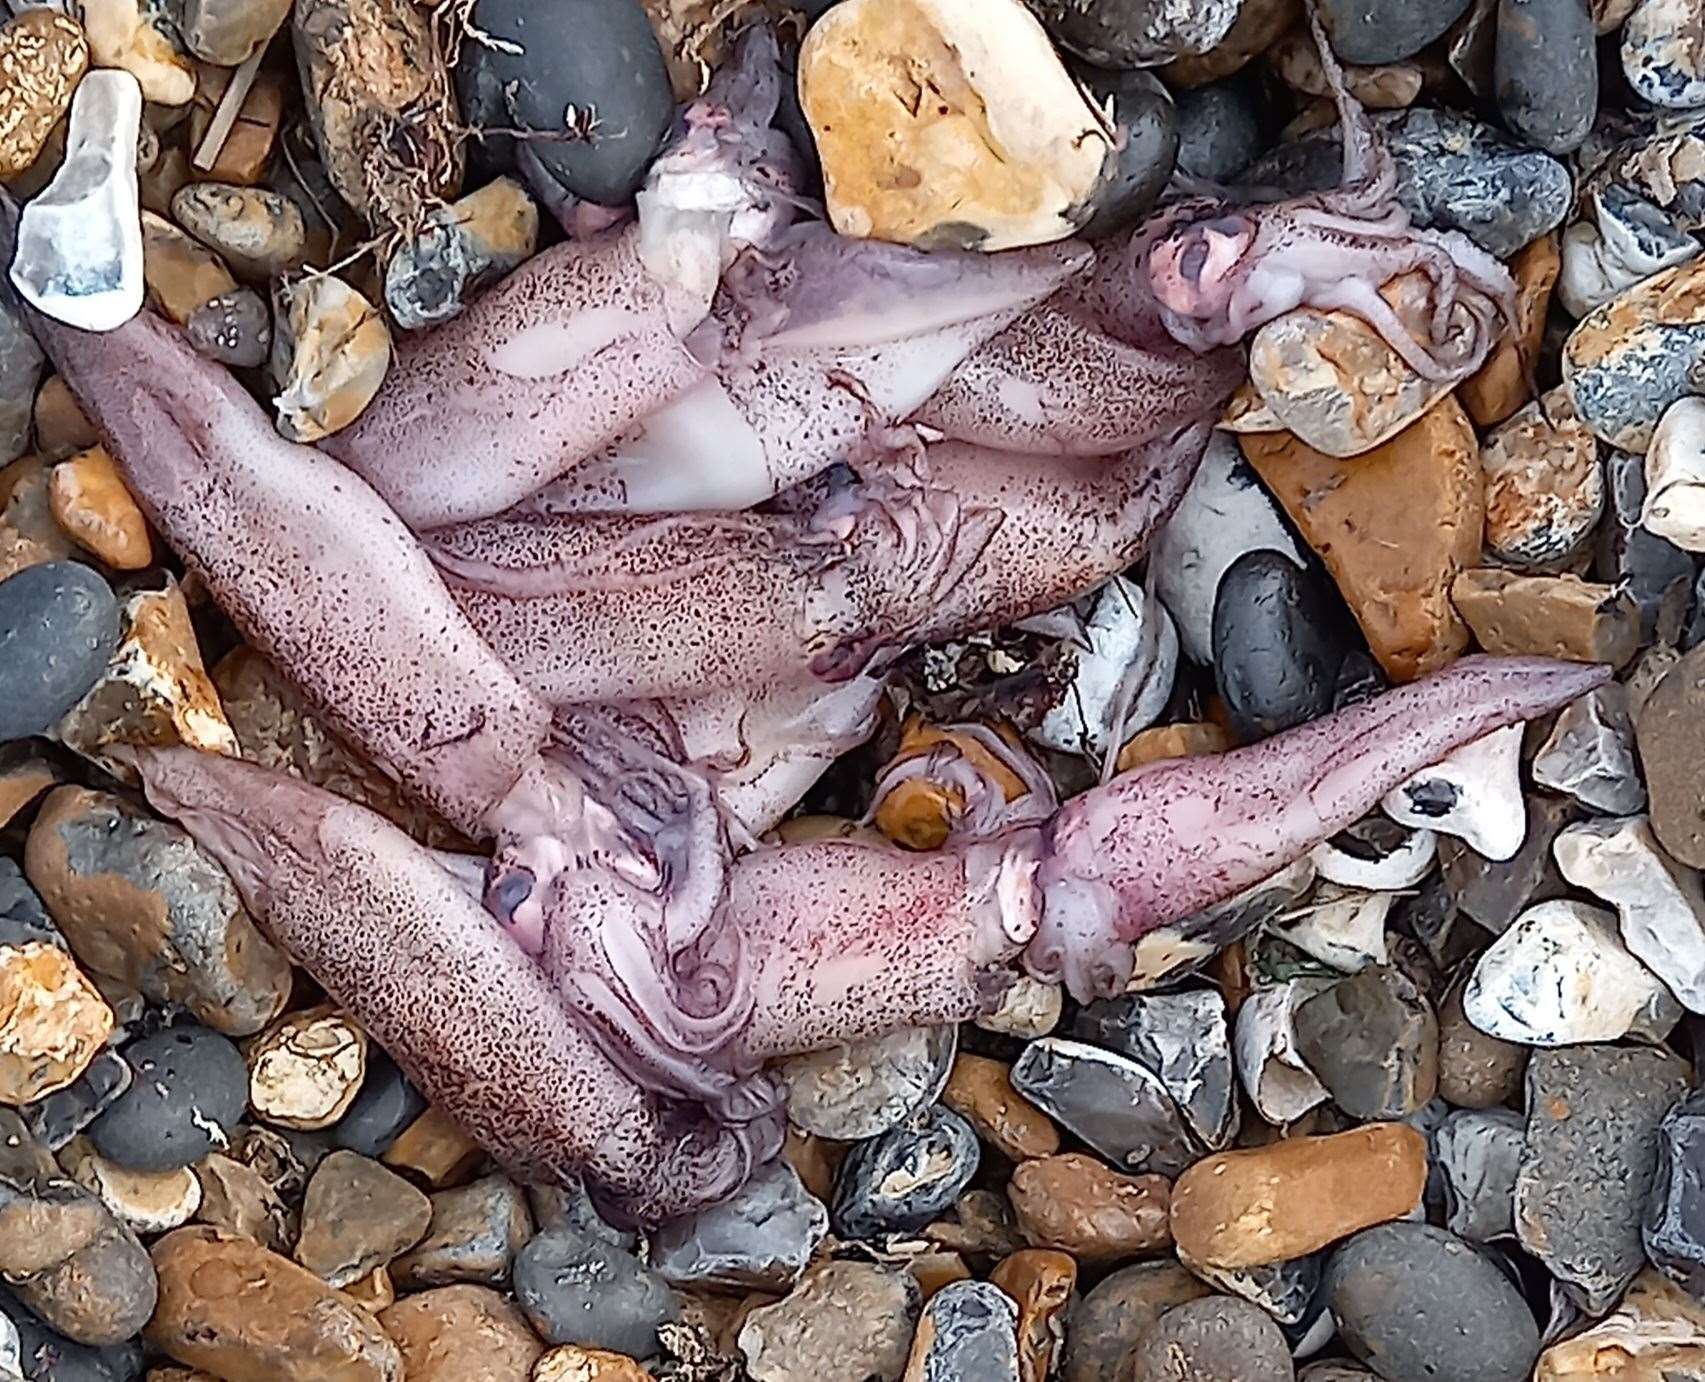 This squid was likely used as bait. Picture: Brandon Whitfield